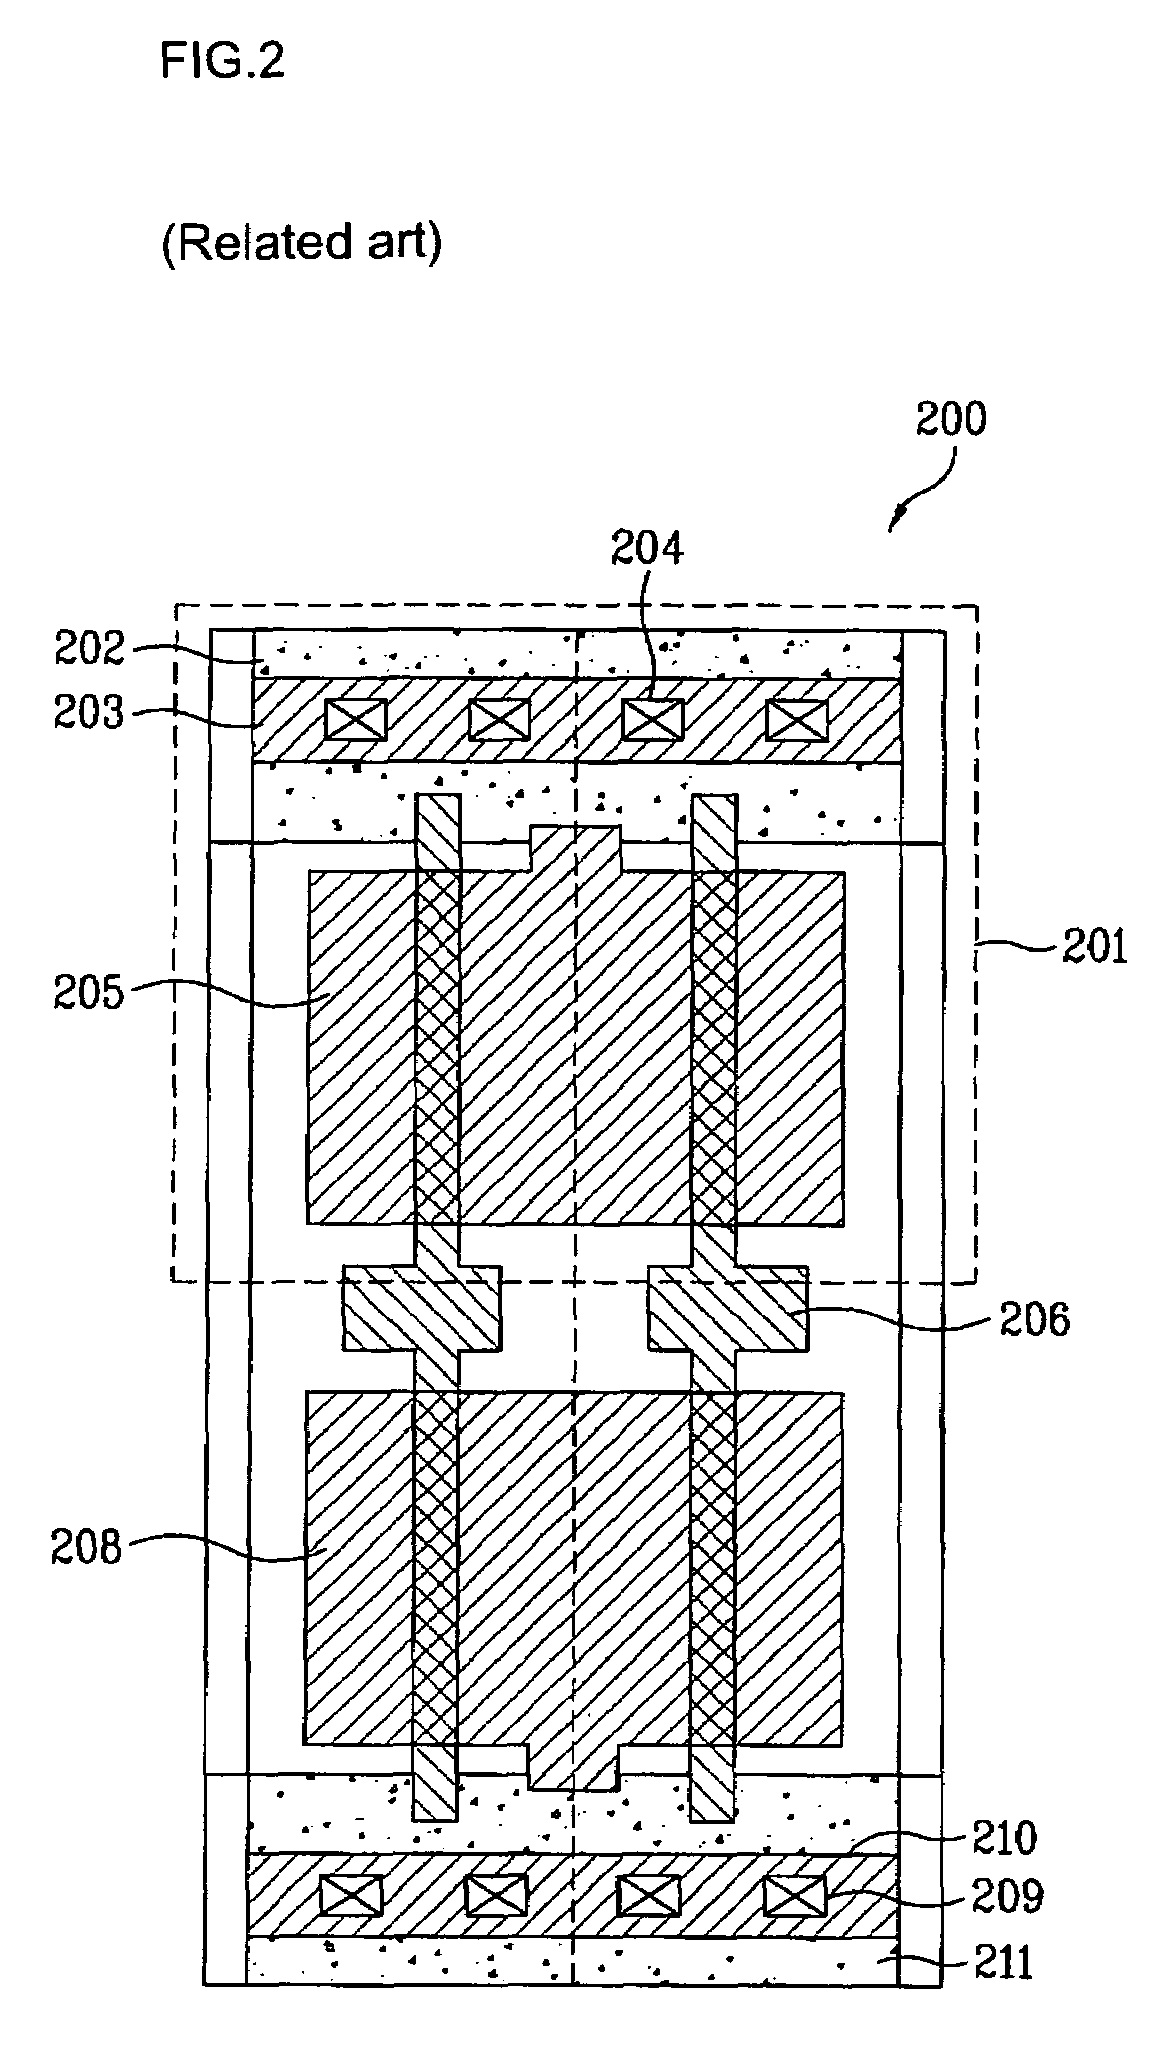 Engineering change order cell and method for arranging and routing the same